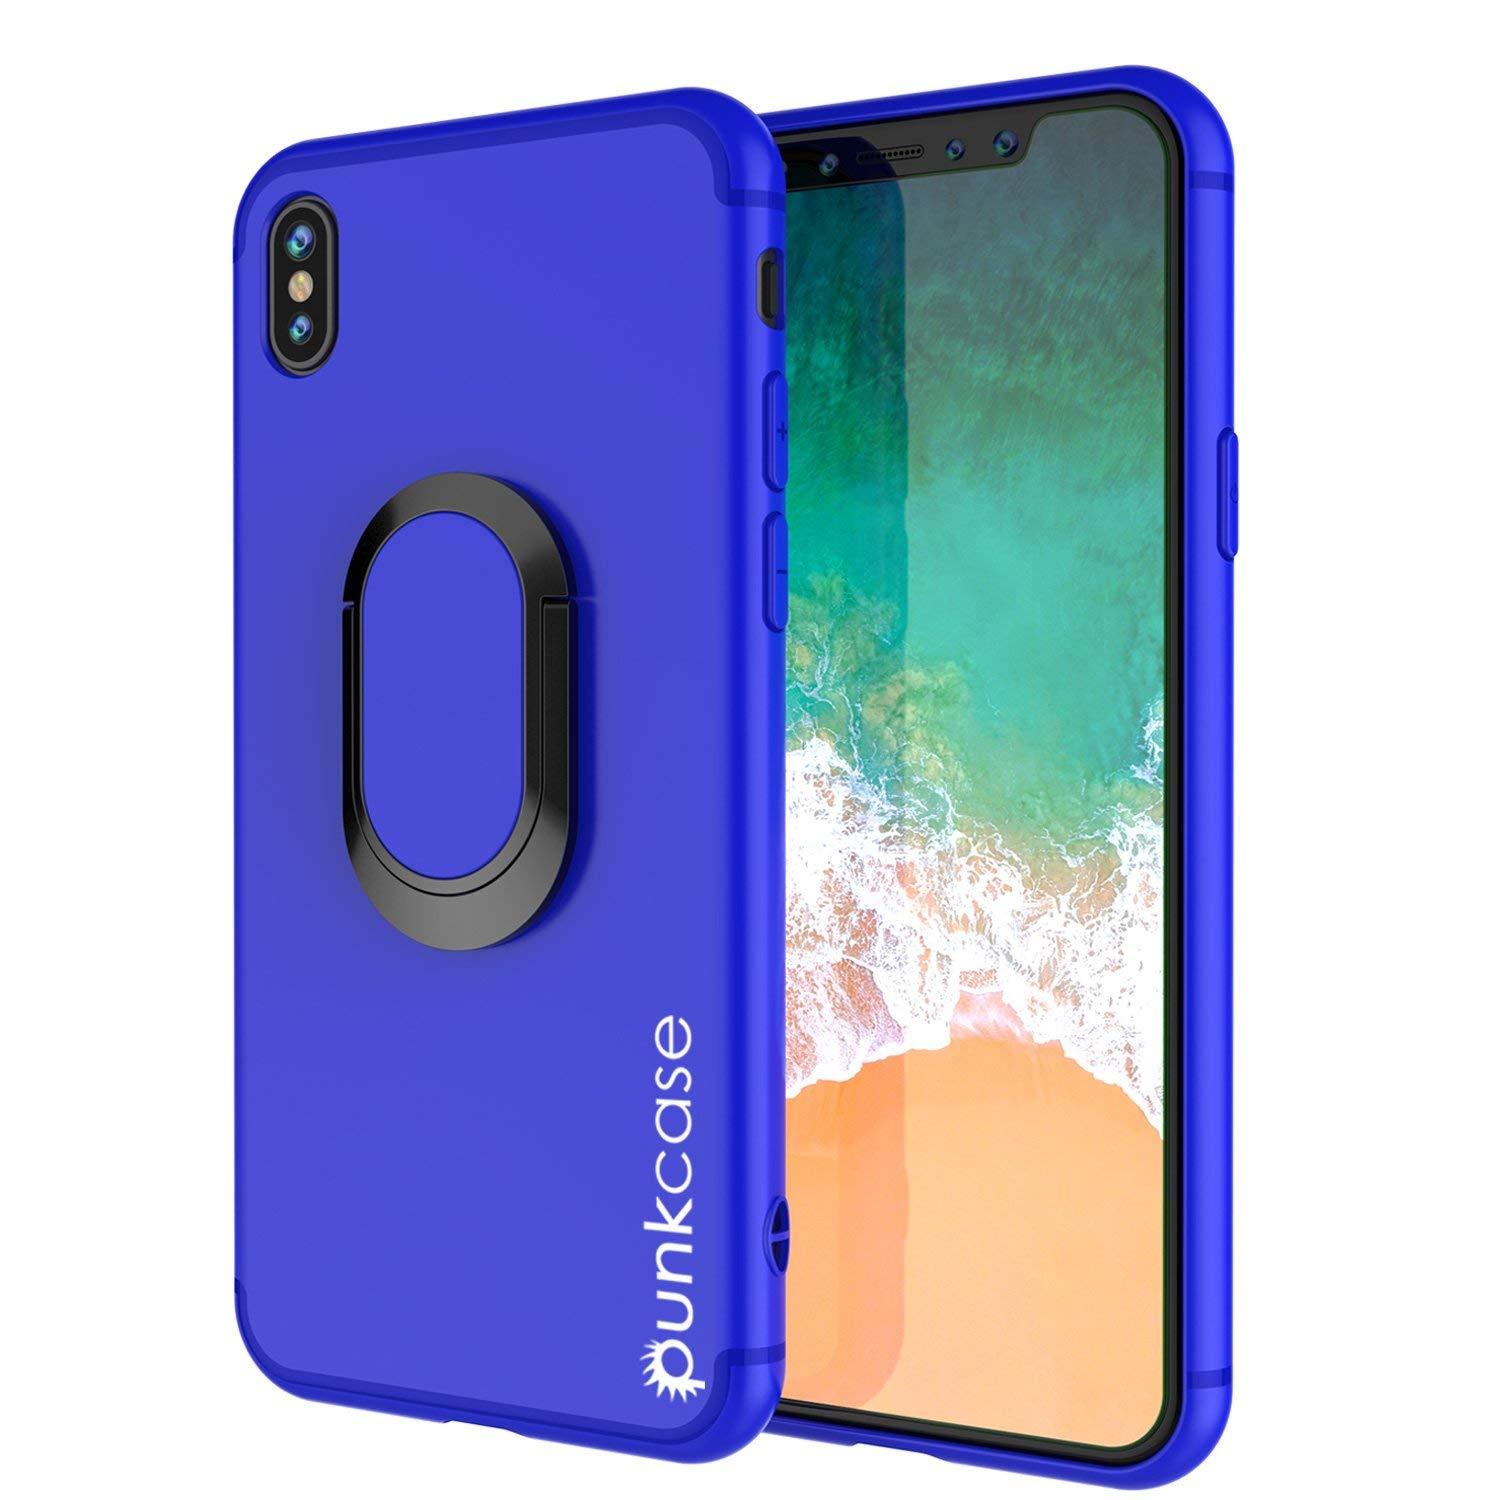 iPhone XR Case, Punkcase Magnetix Protective TPU Cover W/ Kickstand, Tempered Glass Screen Protector [Blue]